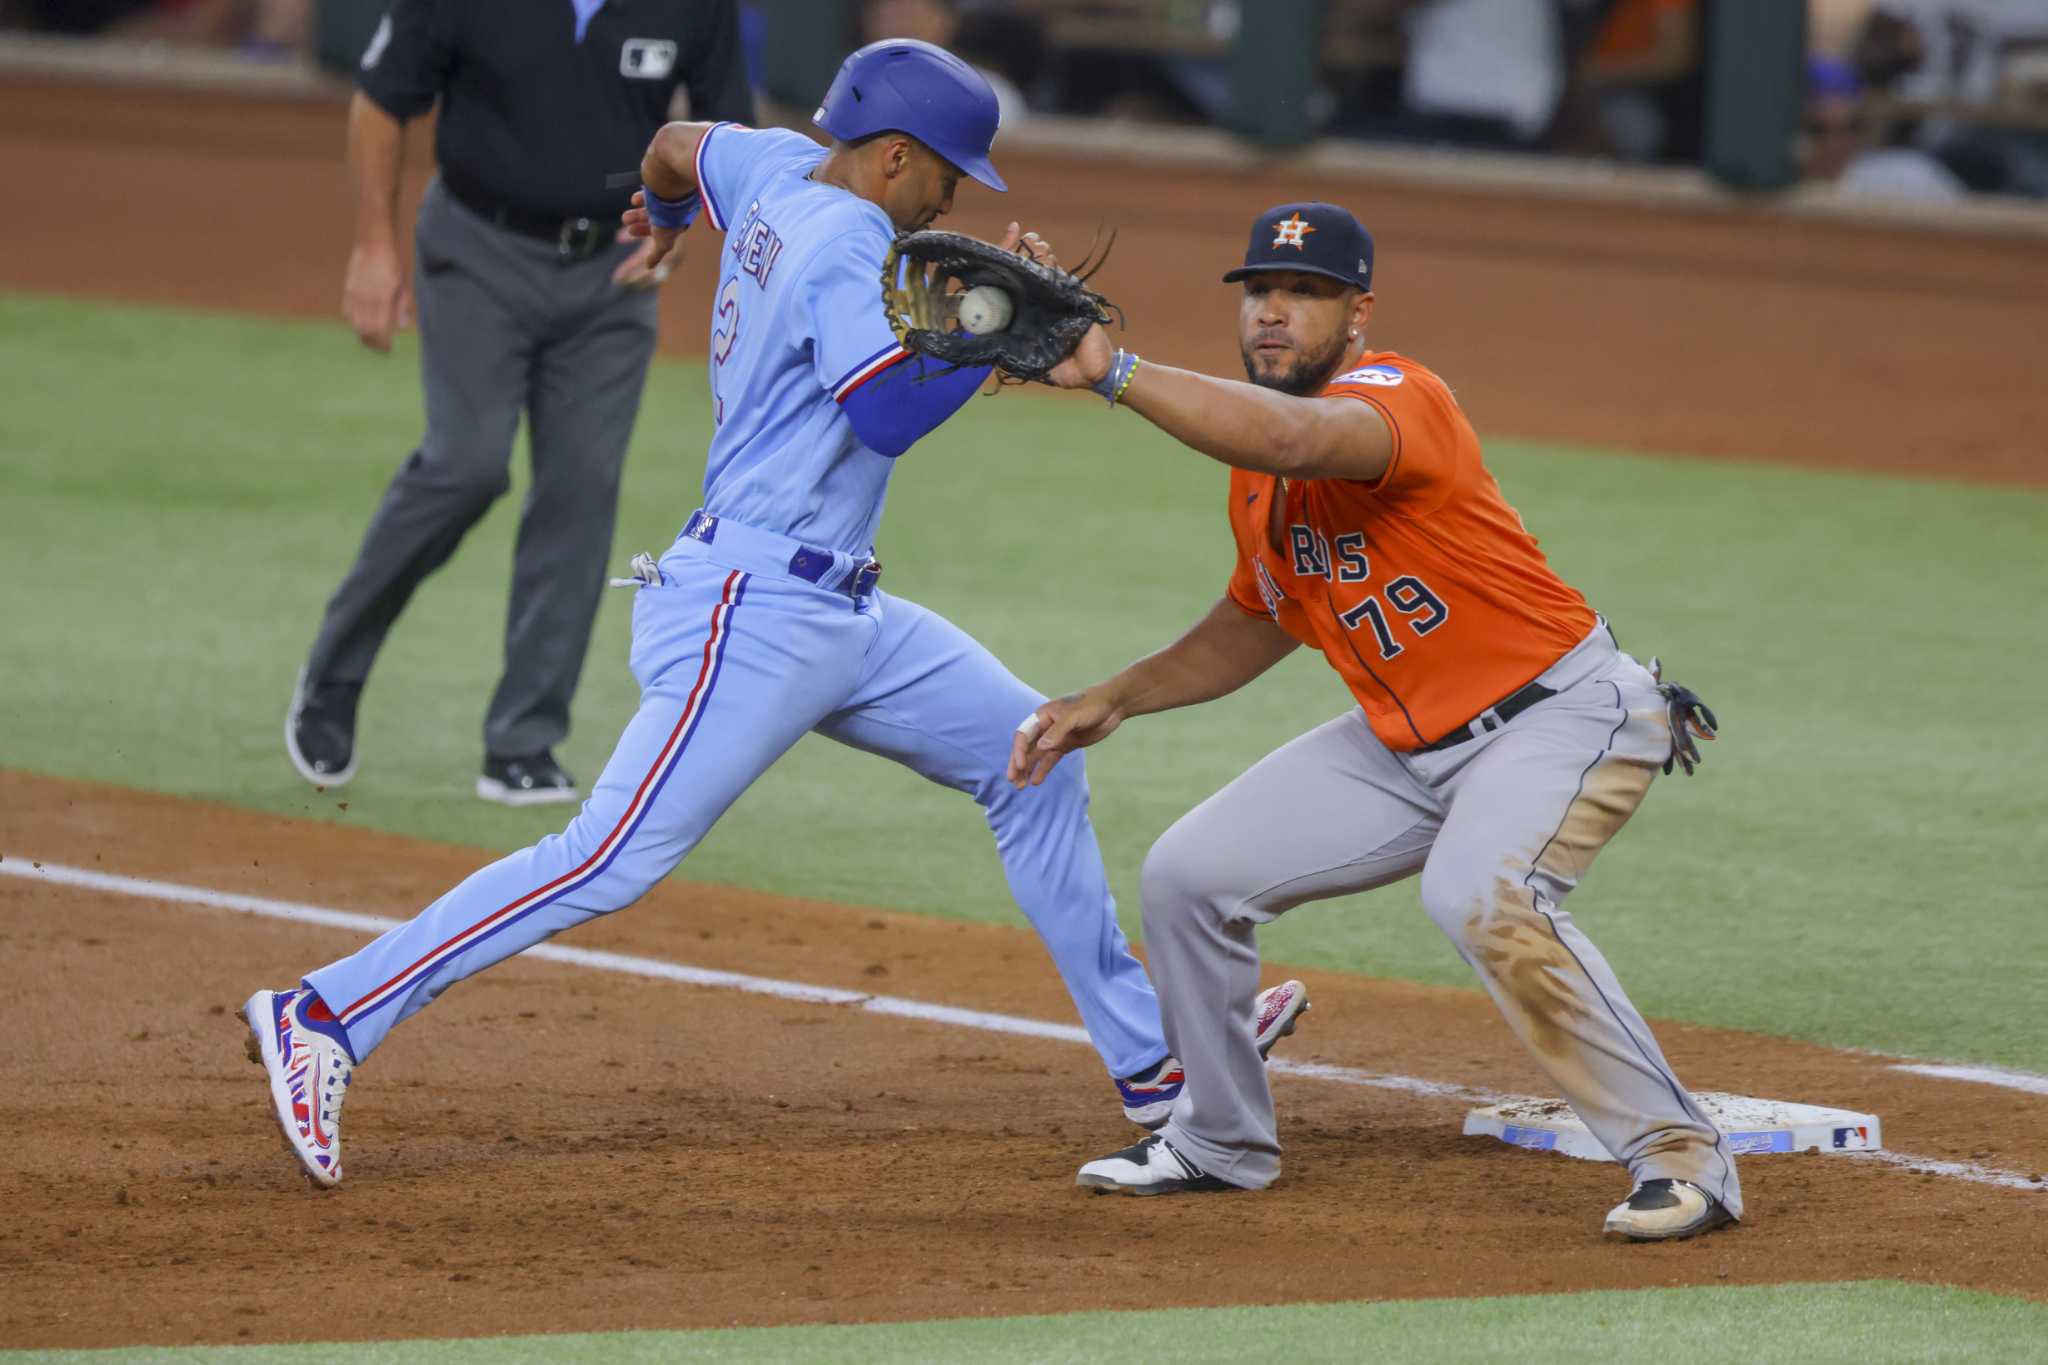 Astros take Lone Star Series, winning 3 out of 4 games